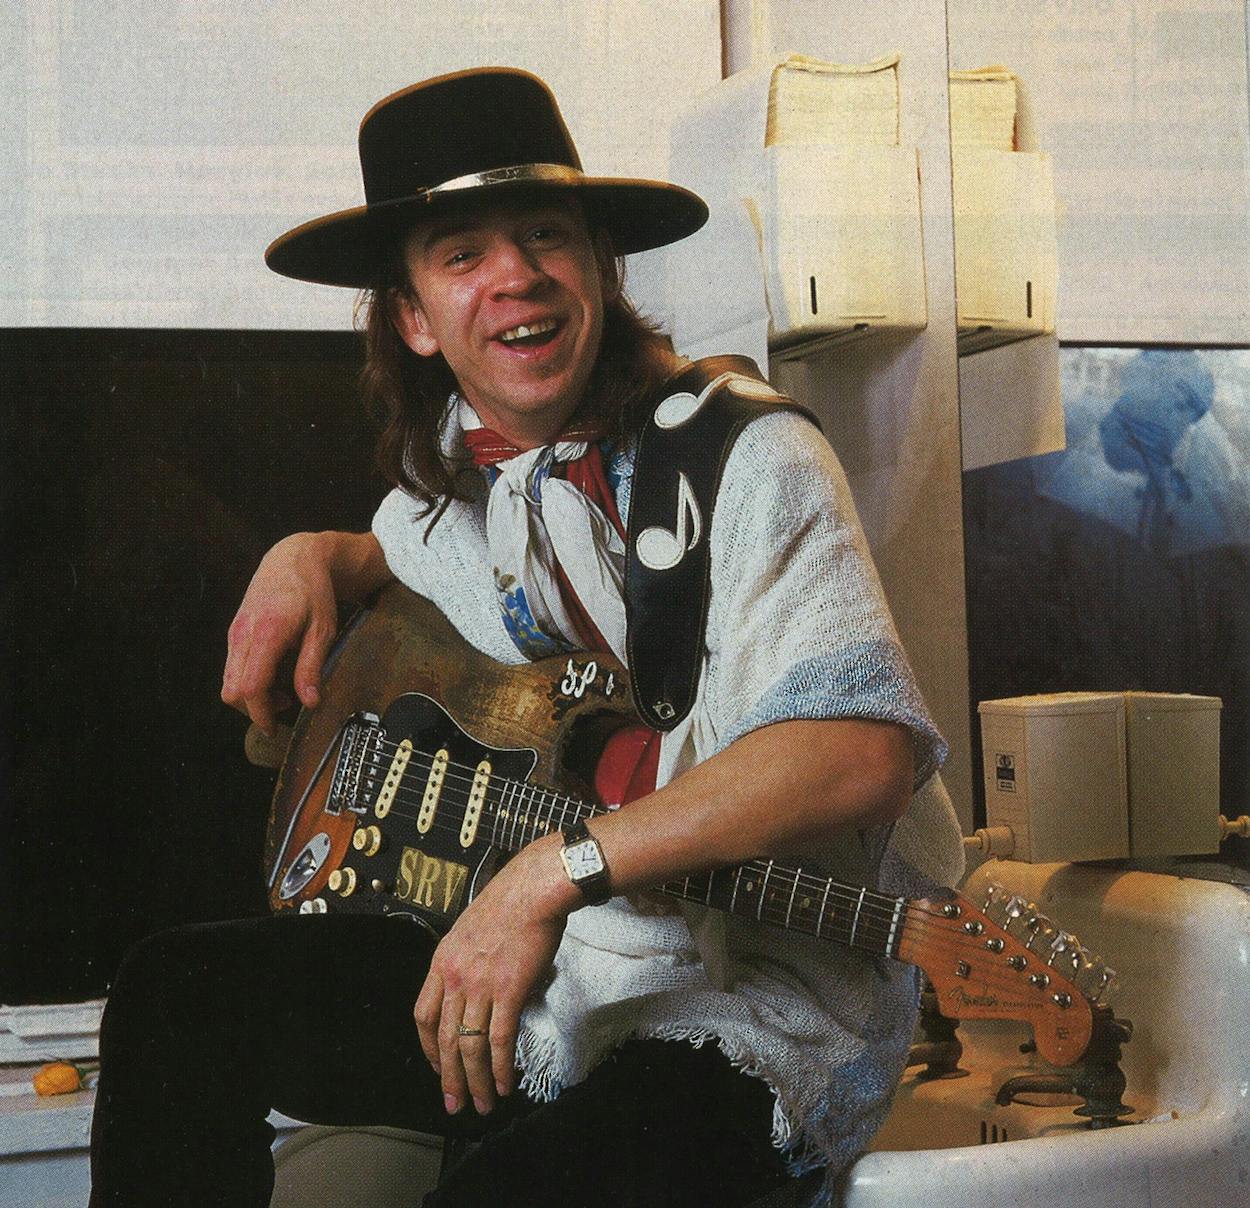 Stevie Ray Vaughan with his guitar.